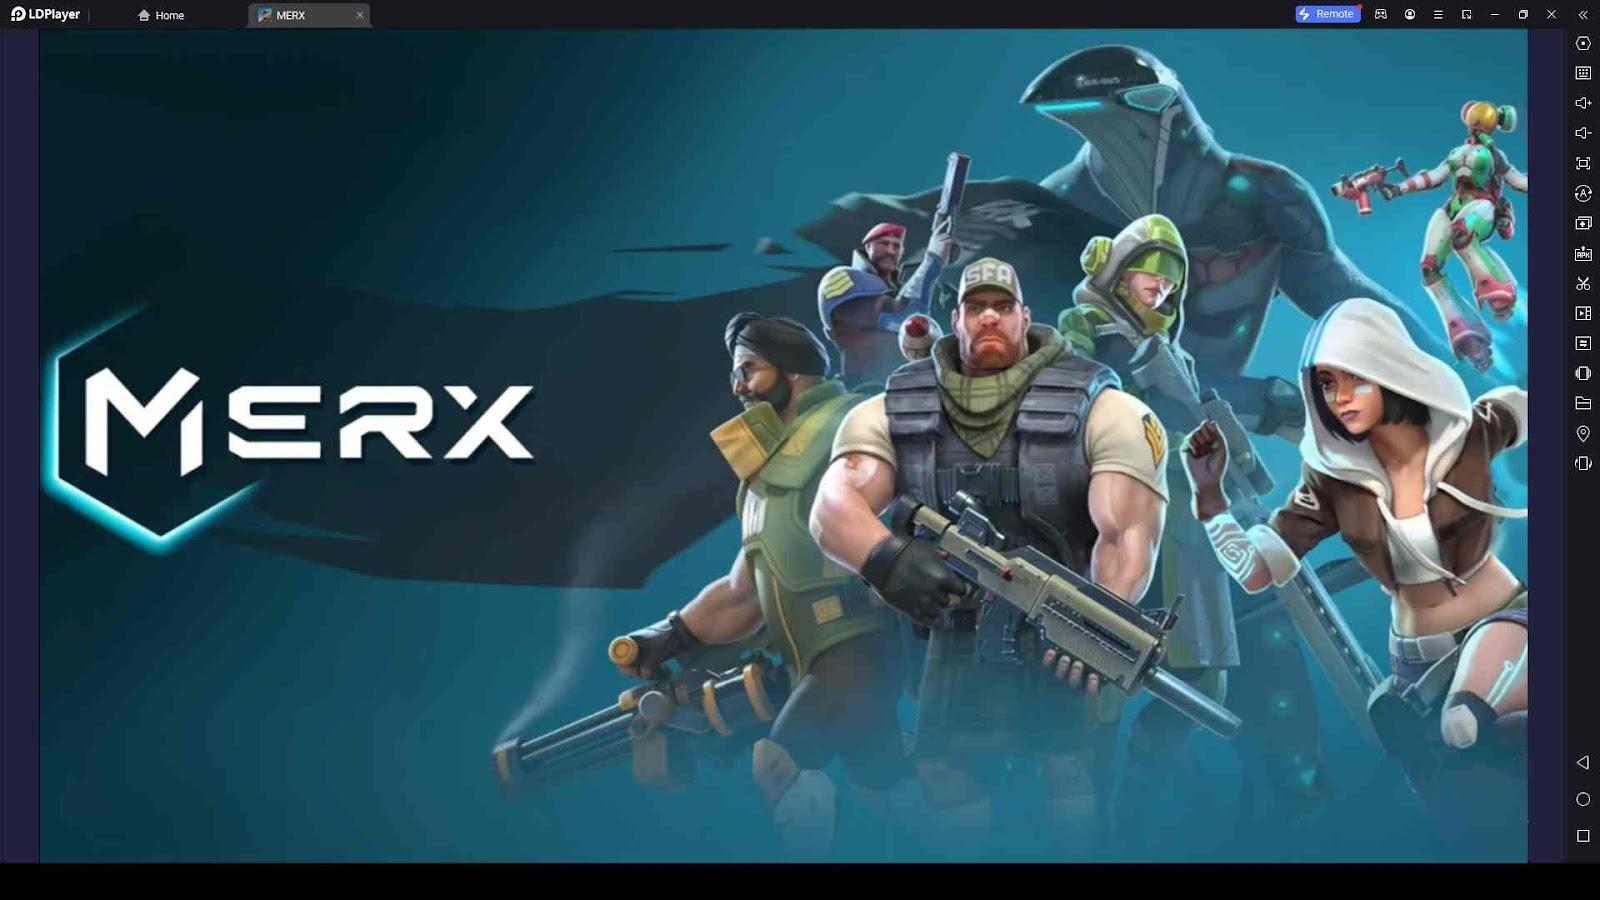 MerX Multiplayer PvP Shooter Codes